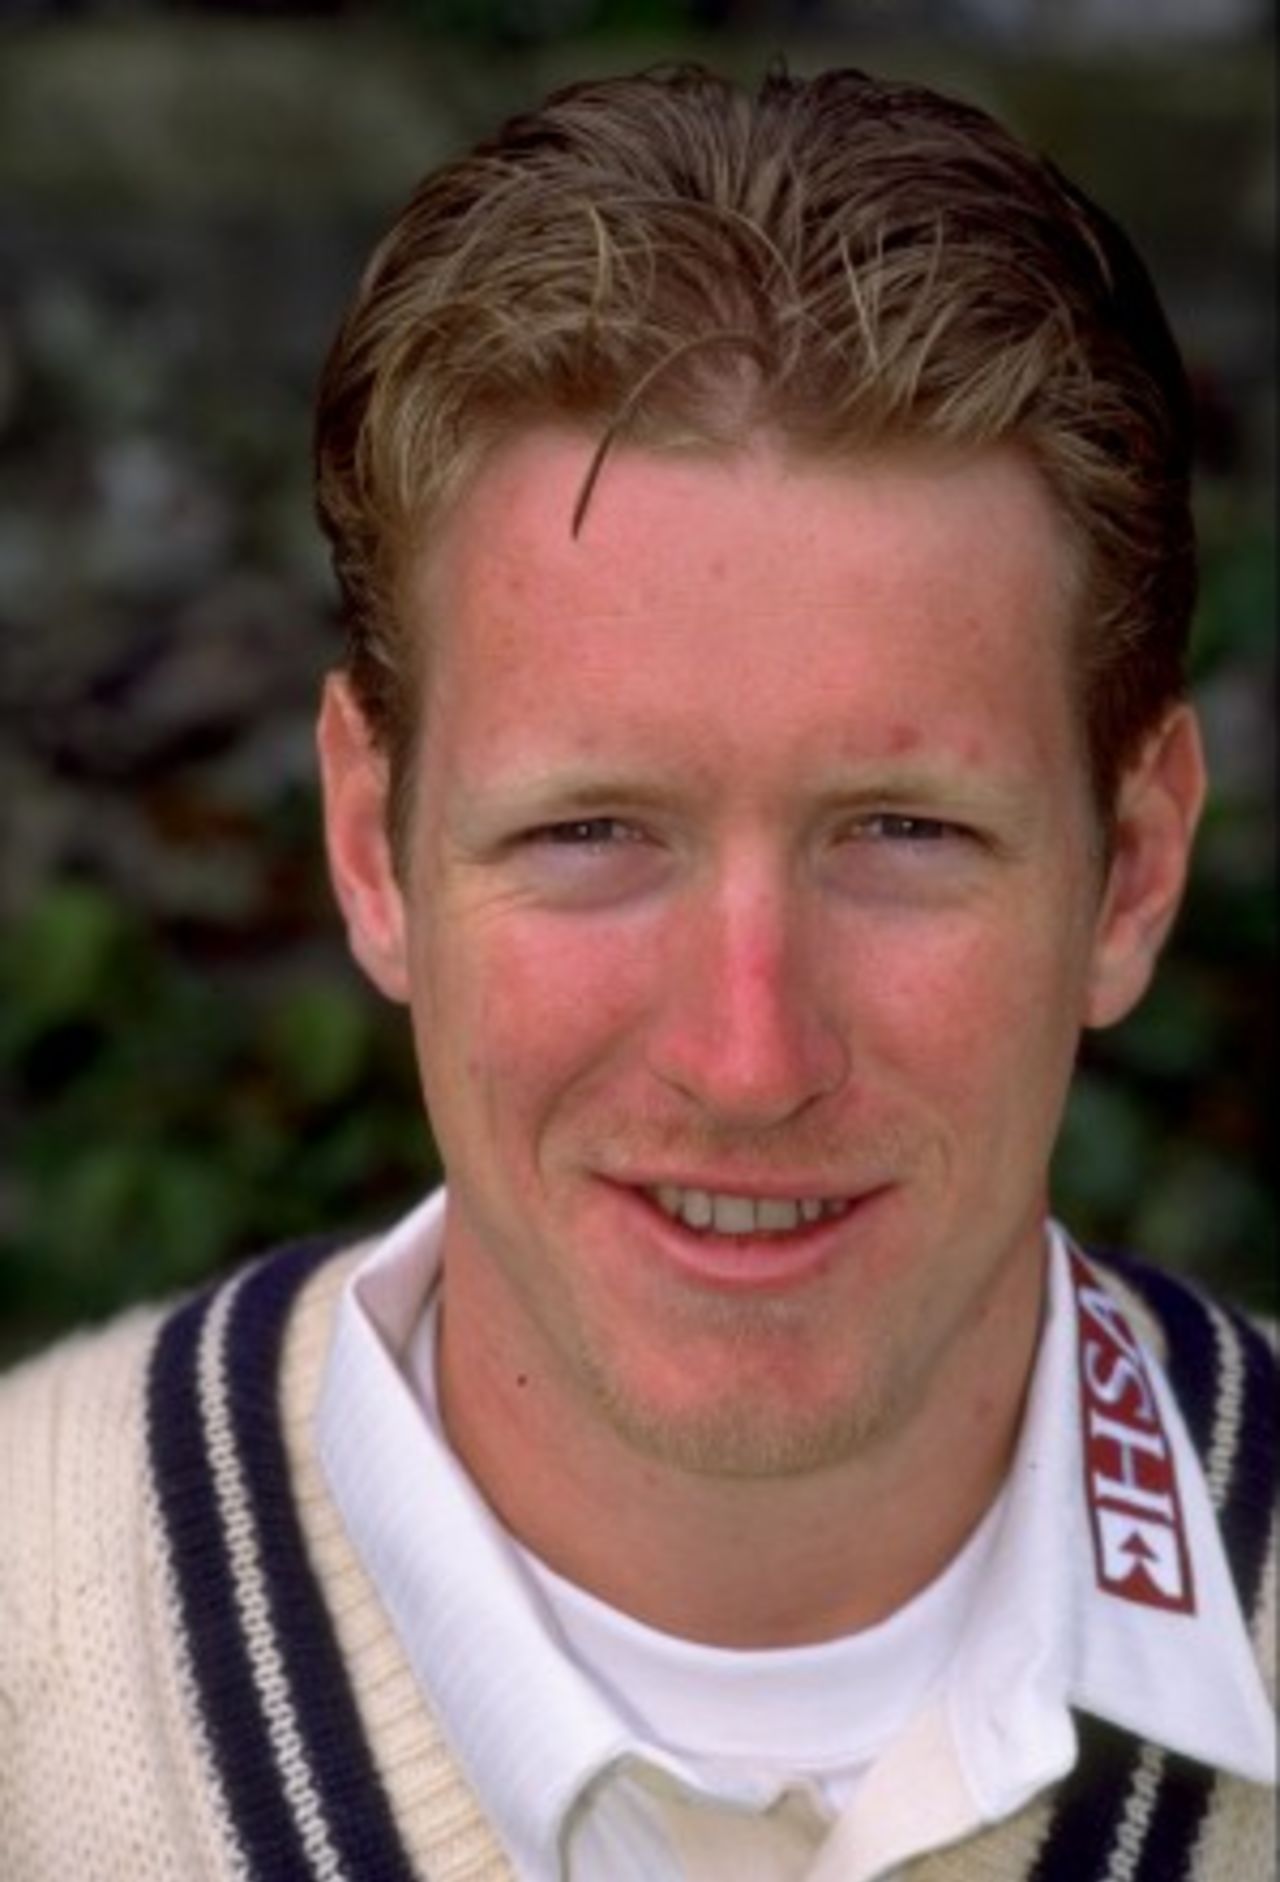 6 Apr 1999: Portrait of Tim Bloomfield of Middlesex.